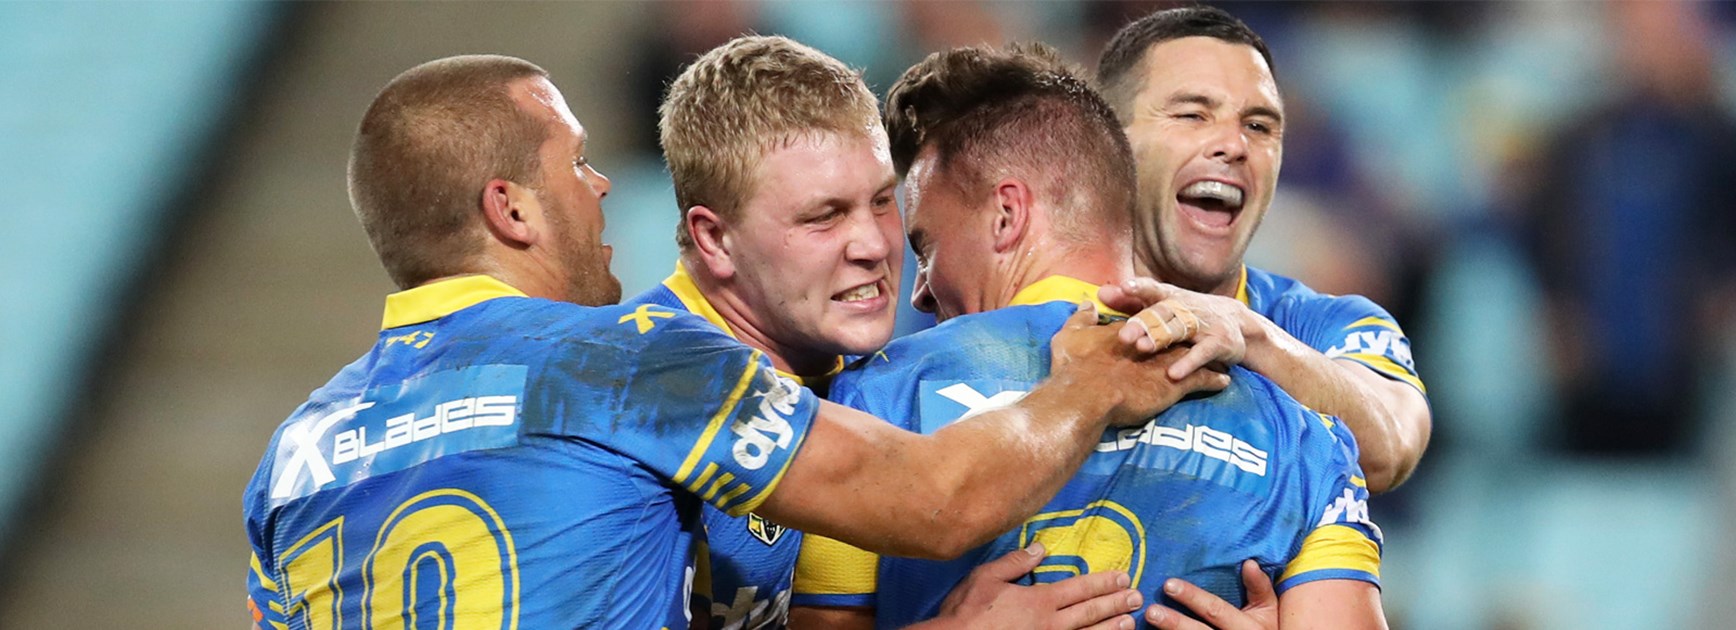 The Eels celebrate Clinton Gutherson's try against Souths on Friday night.